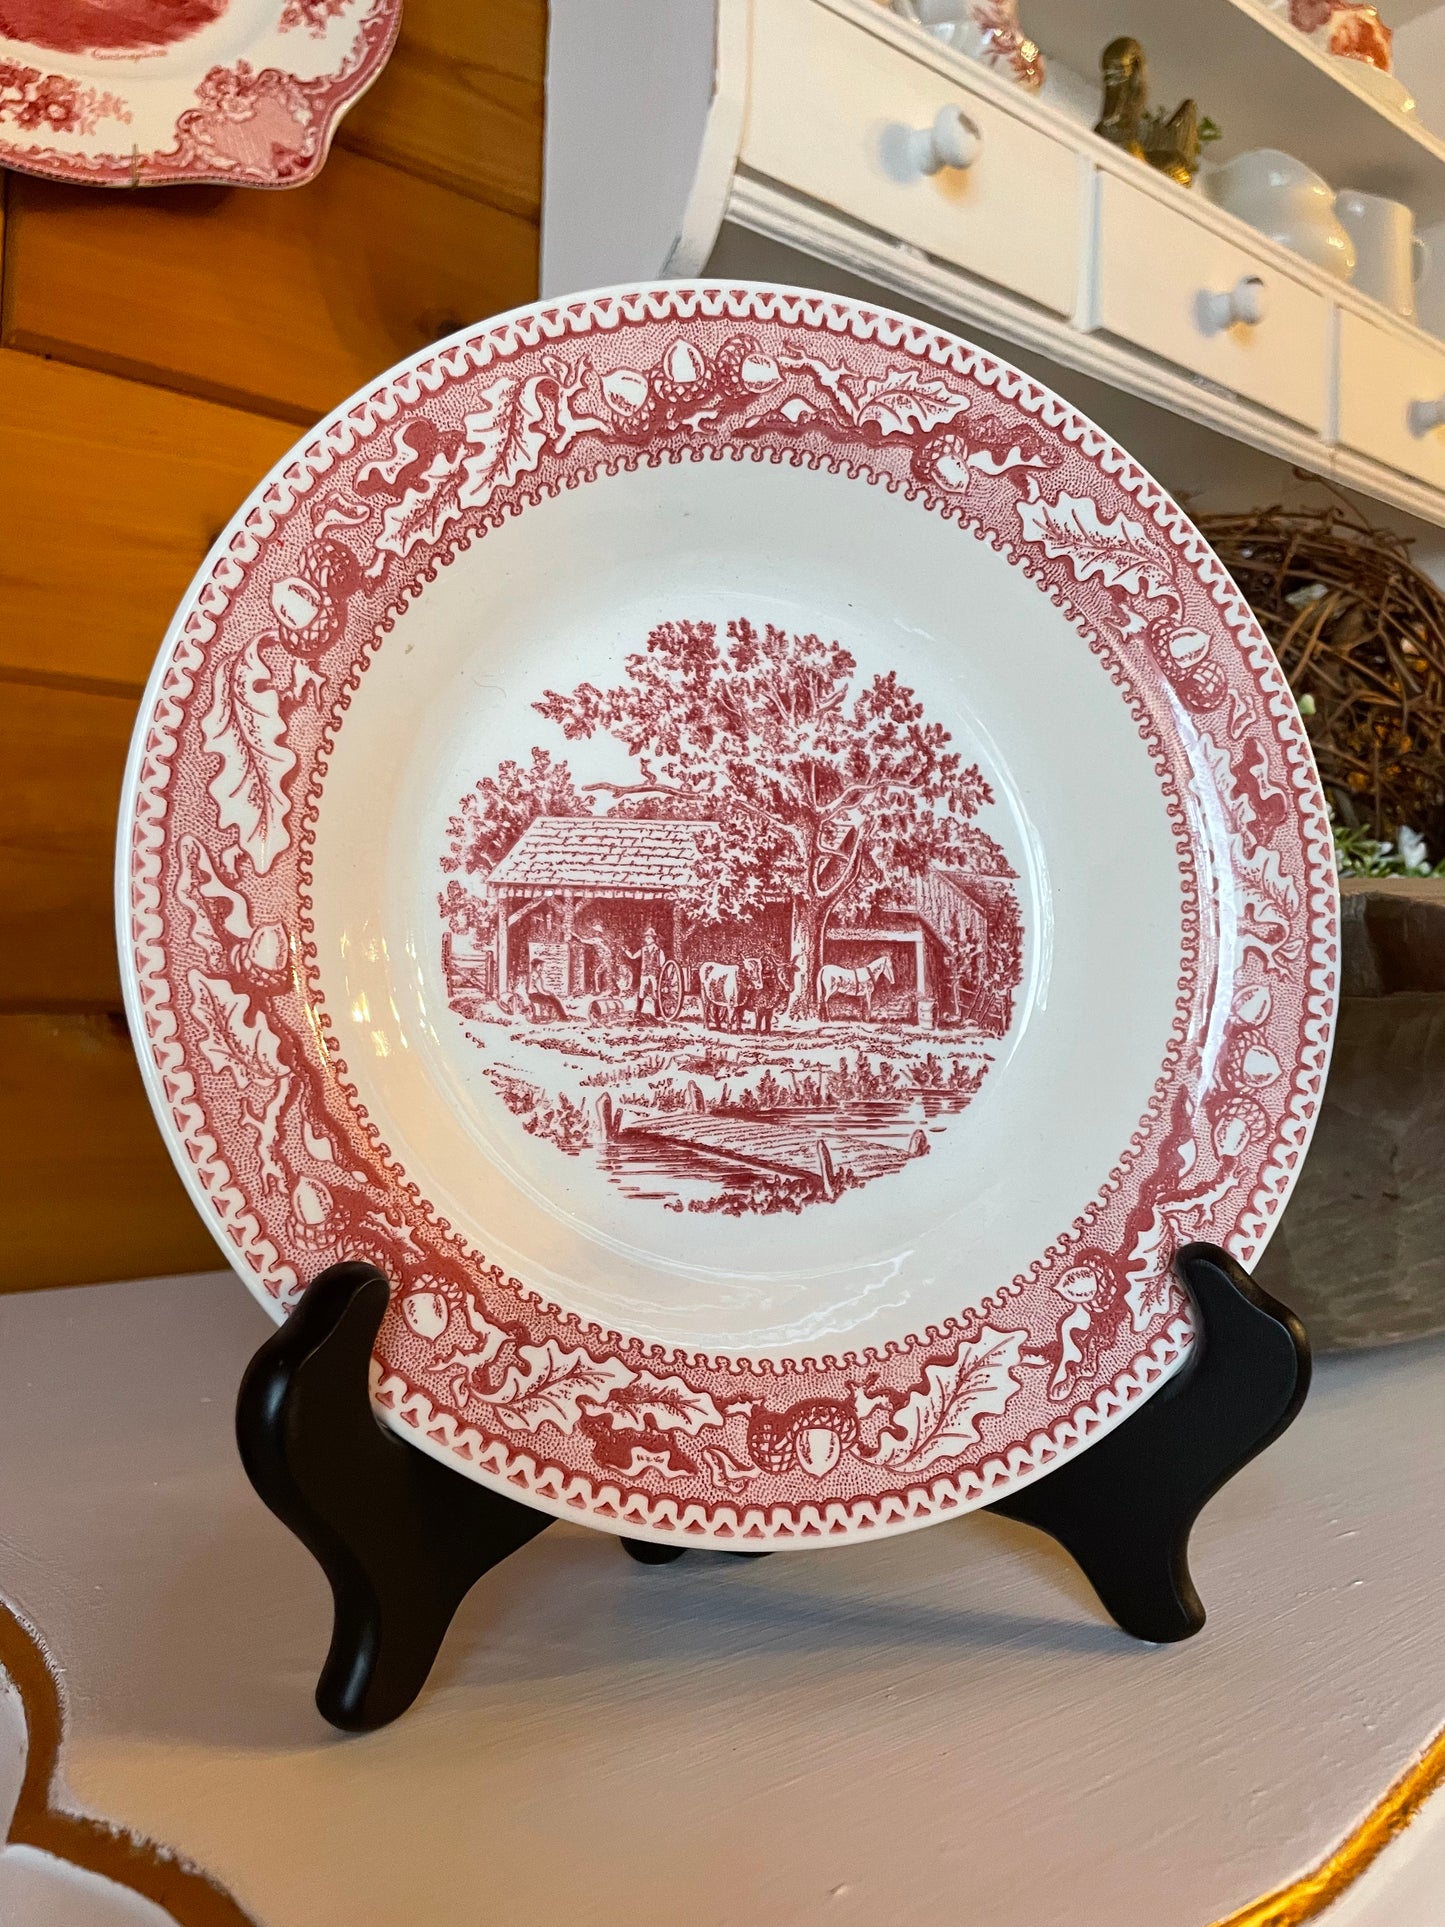 Vintage Bowl with Farm Scene Depicted on Front - Made in the USA!